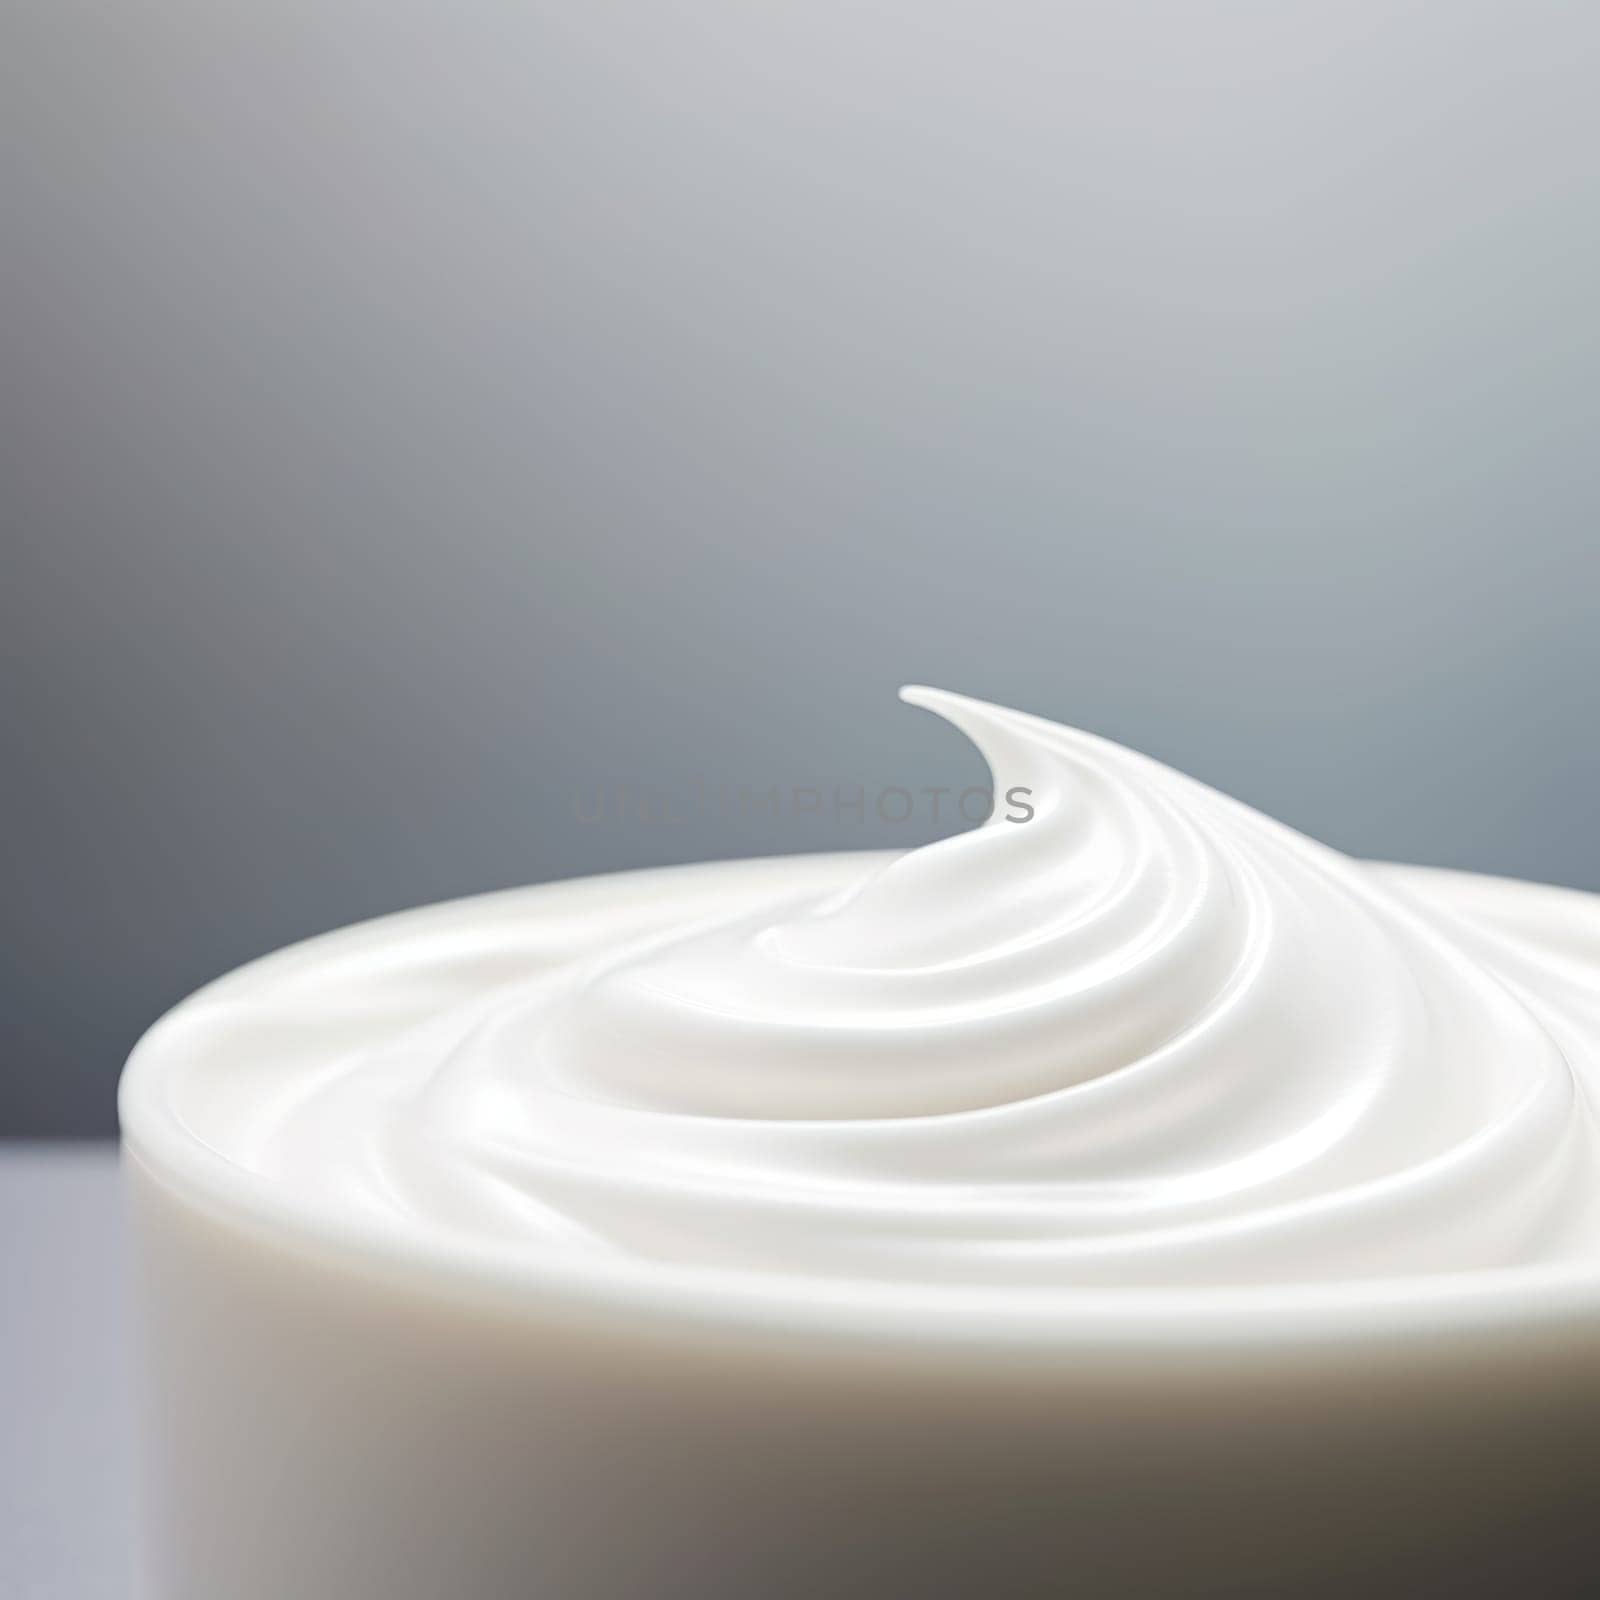 A close up of a bowl of whipped cream